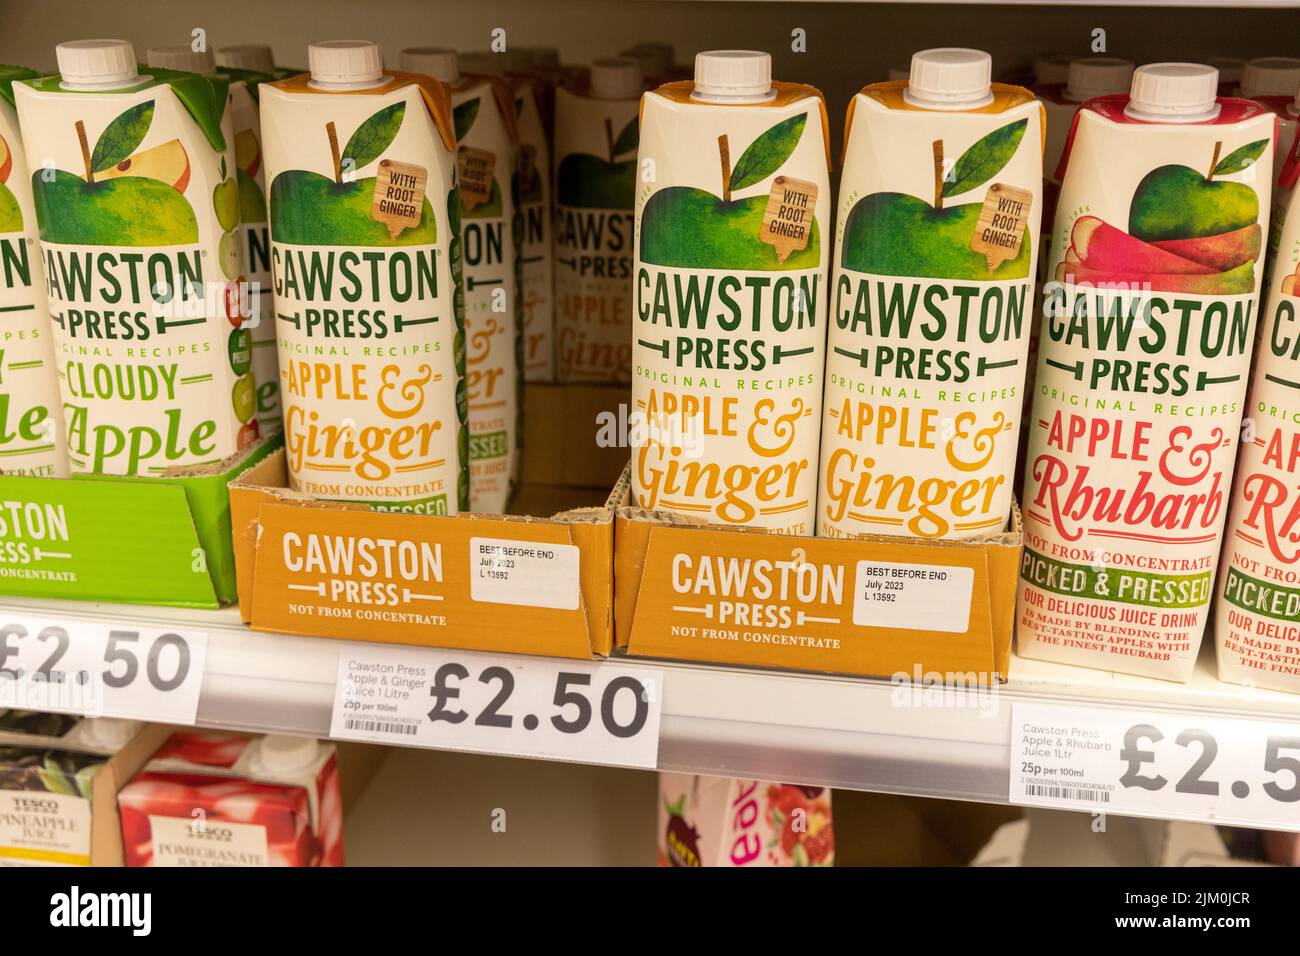 Cawston press juices in various flavours including apple and ginger, in an English supermarket,Uk Stock Photo